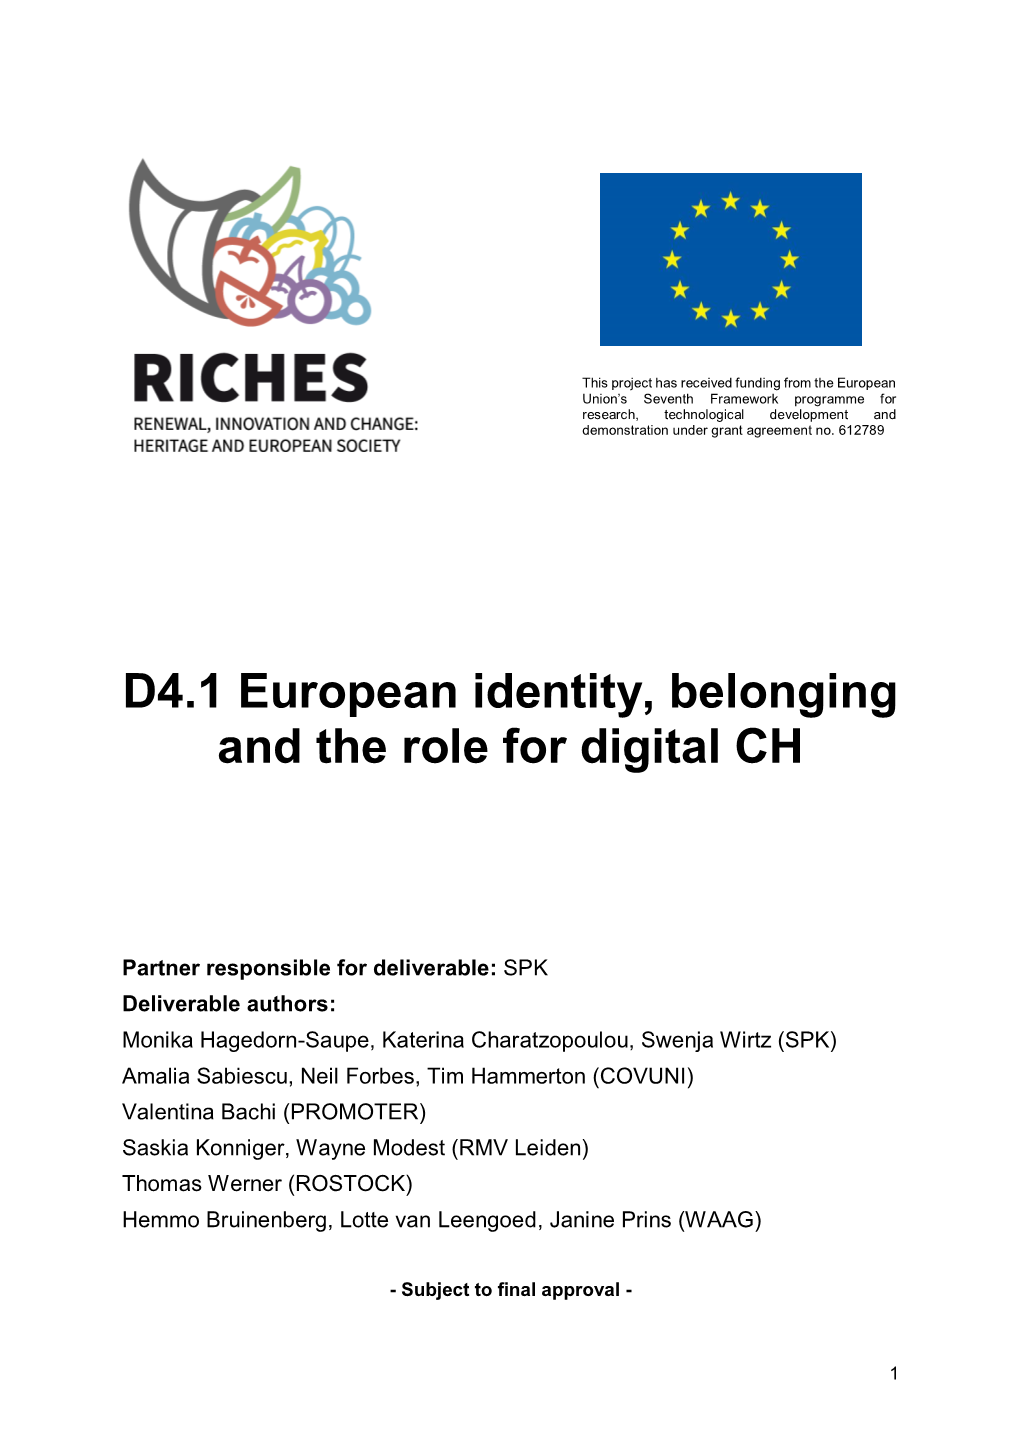 D4.1 European Identity, Belonging and the Role for Digital CH